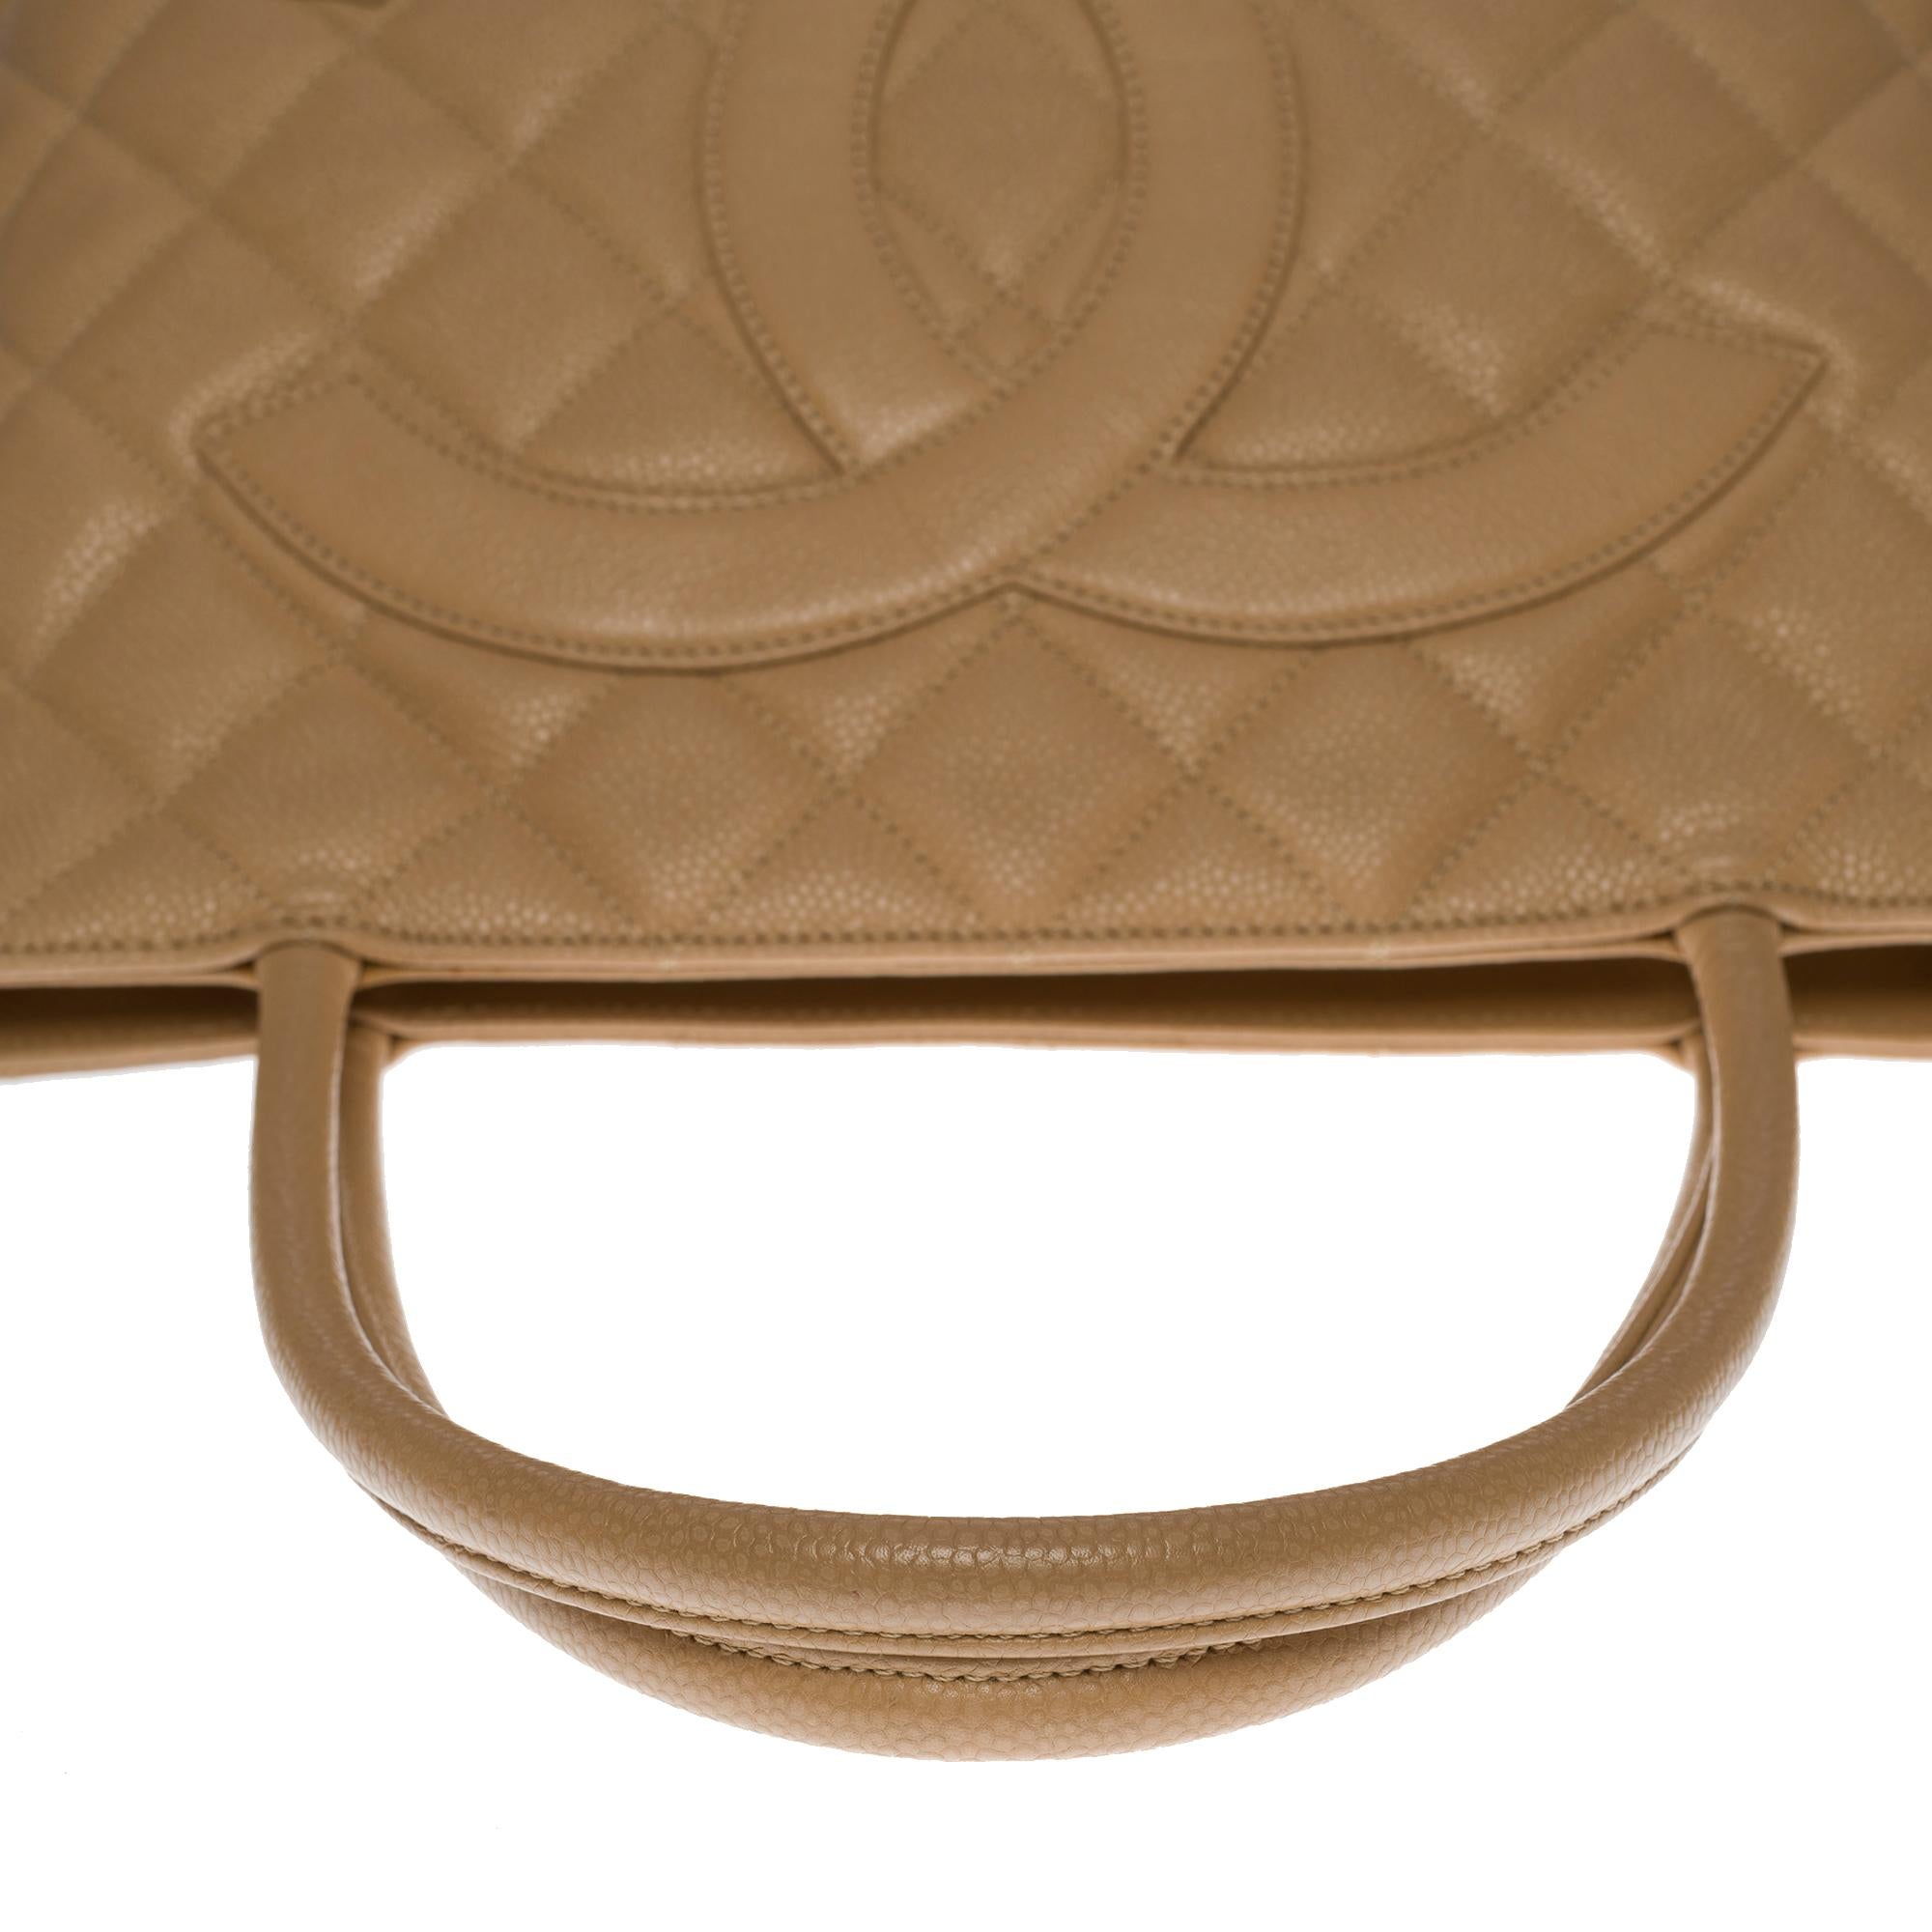  Chanel Médaillon Tote bag in beige caviar leather, GHW 6